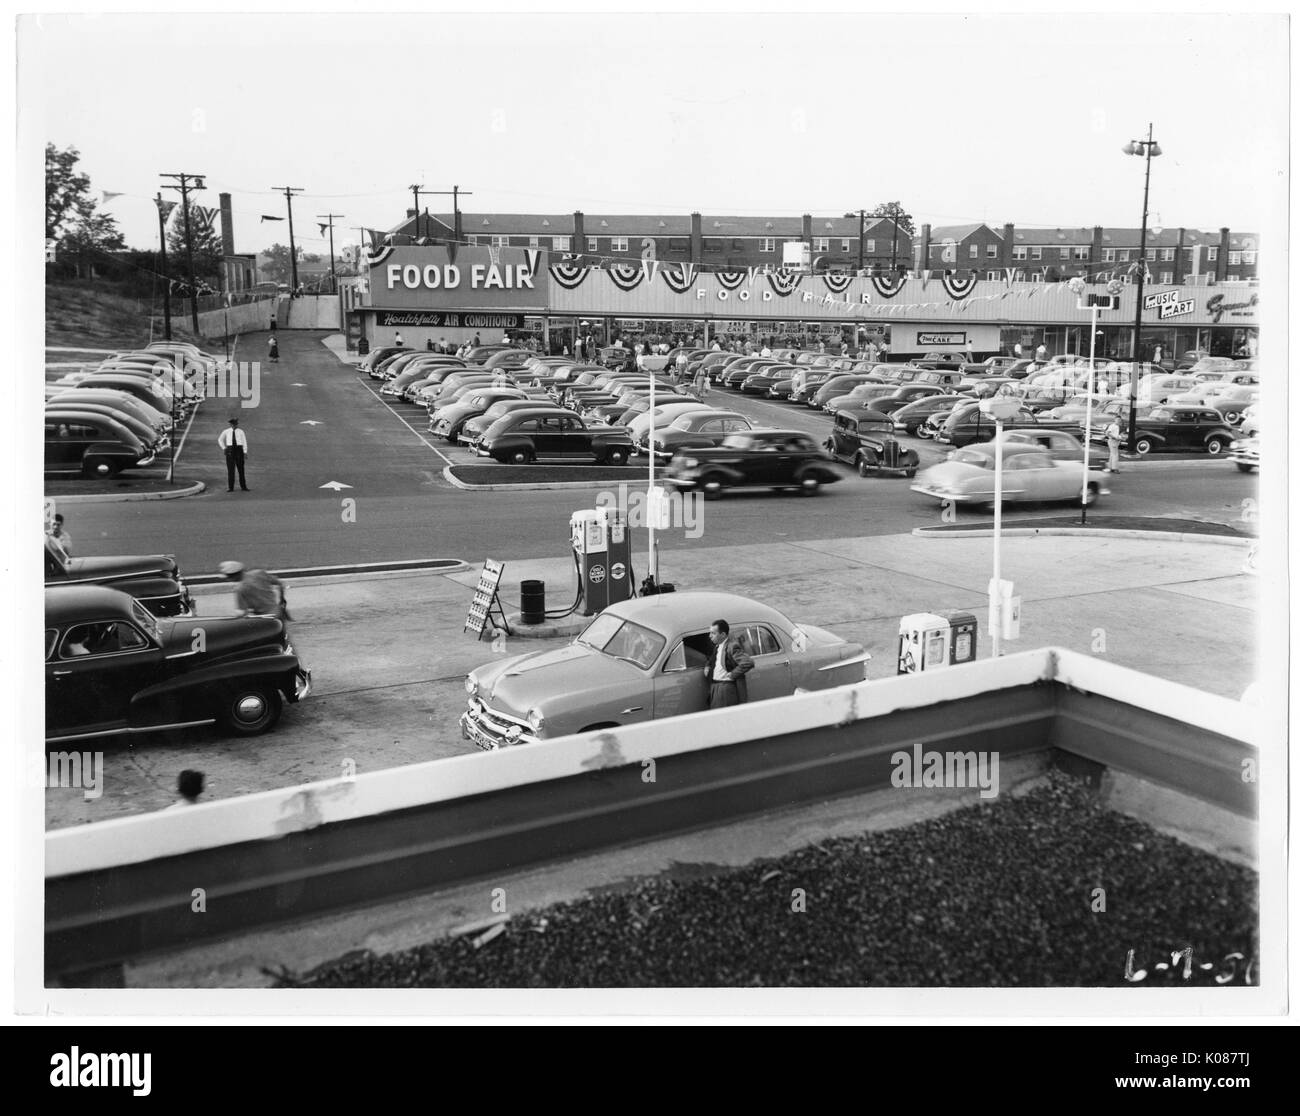 View of a gas station with pumps connected to cars, behind the gas station is a packed parking lot for the Food Fair store, behind the Food Fair store are row homes, Baltimore, Maryland, 1951. Stock Photo